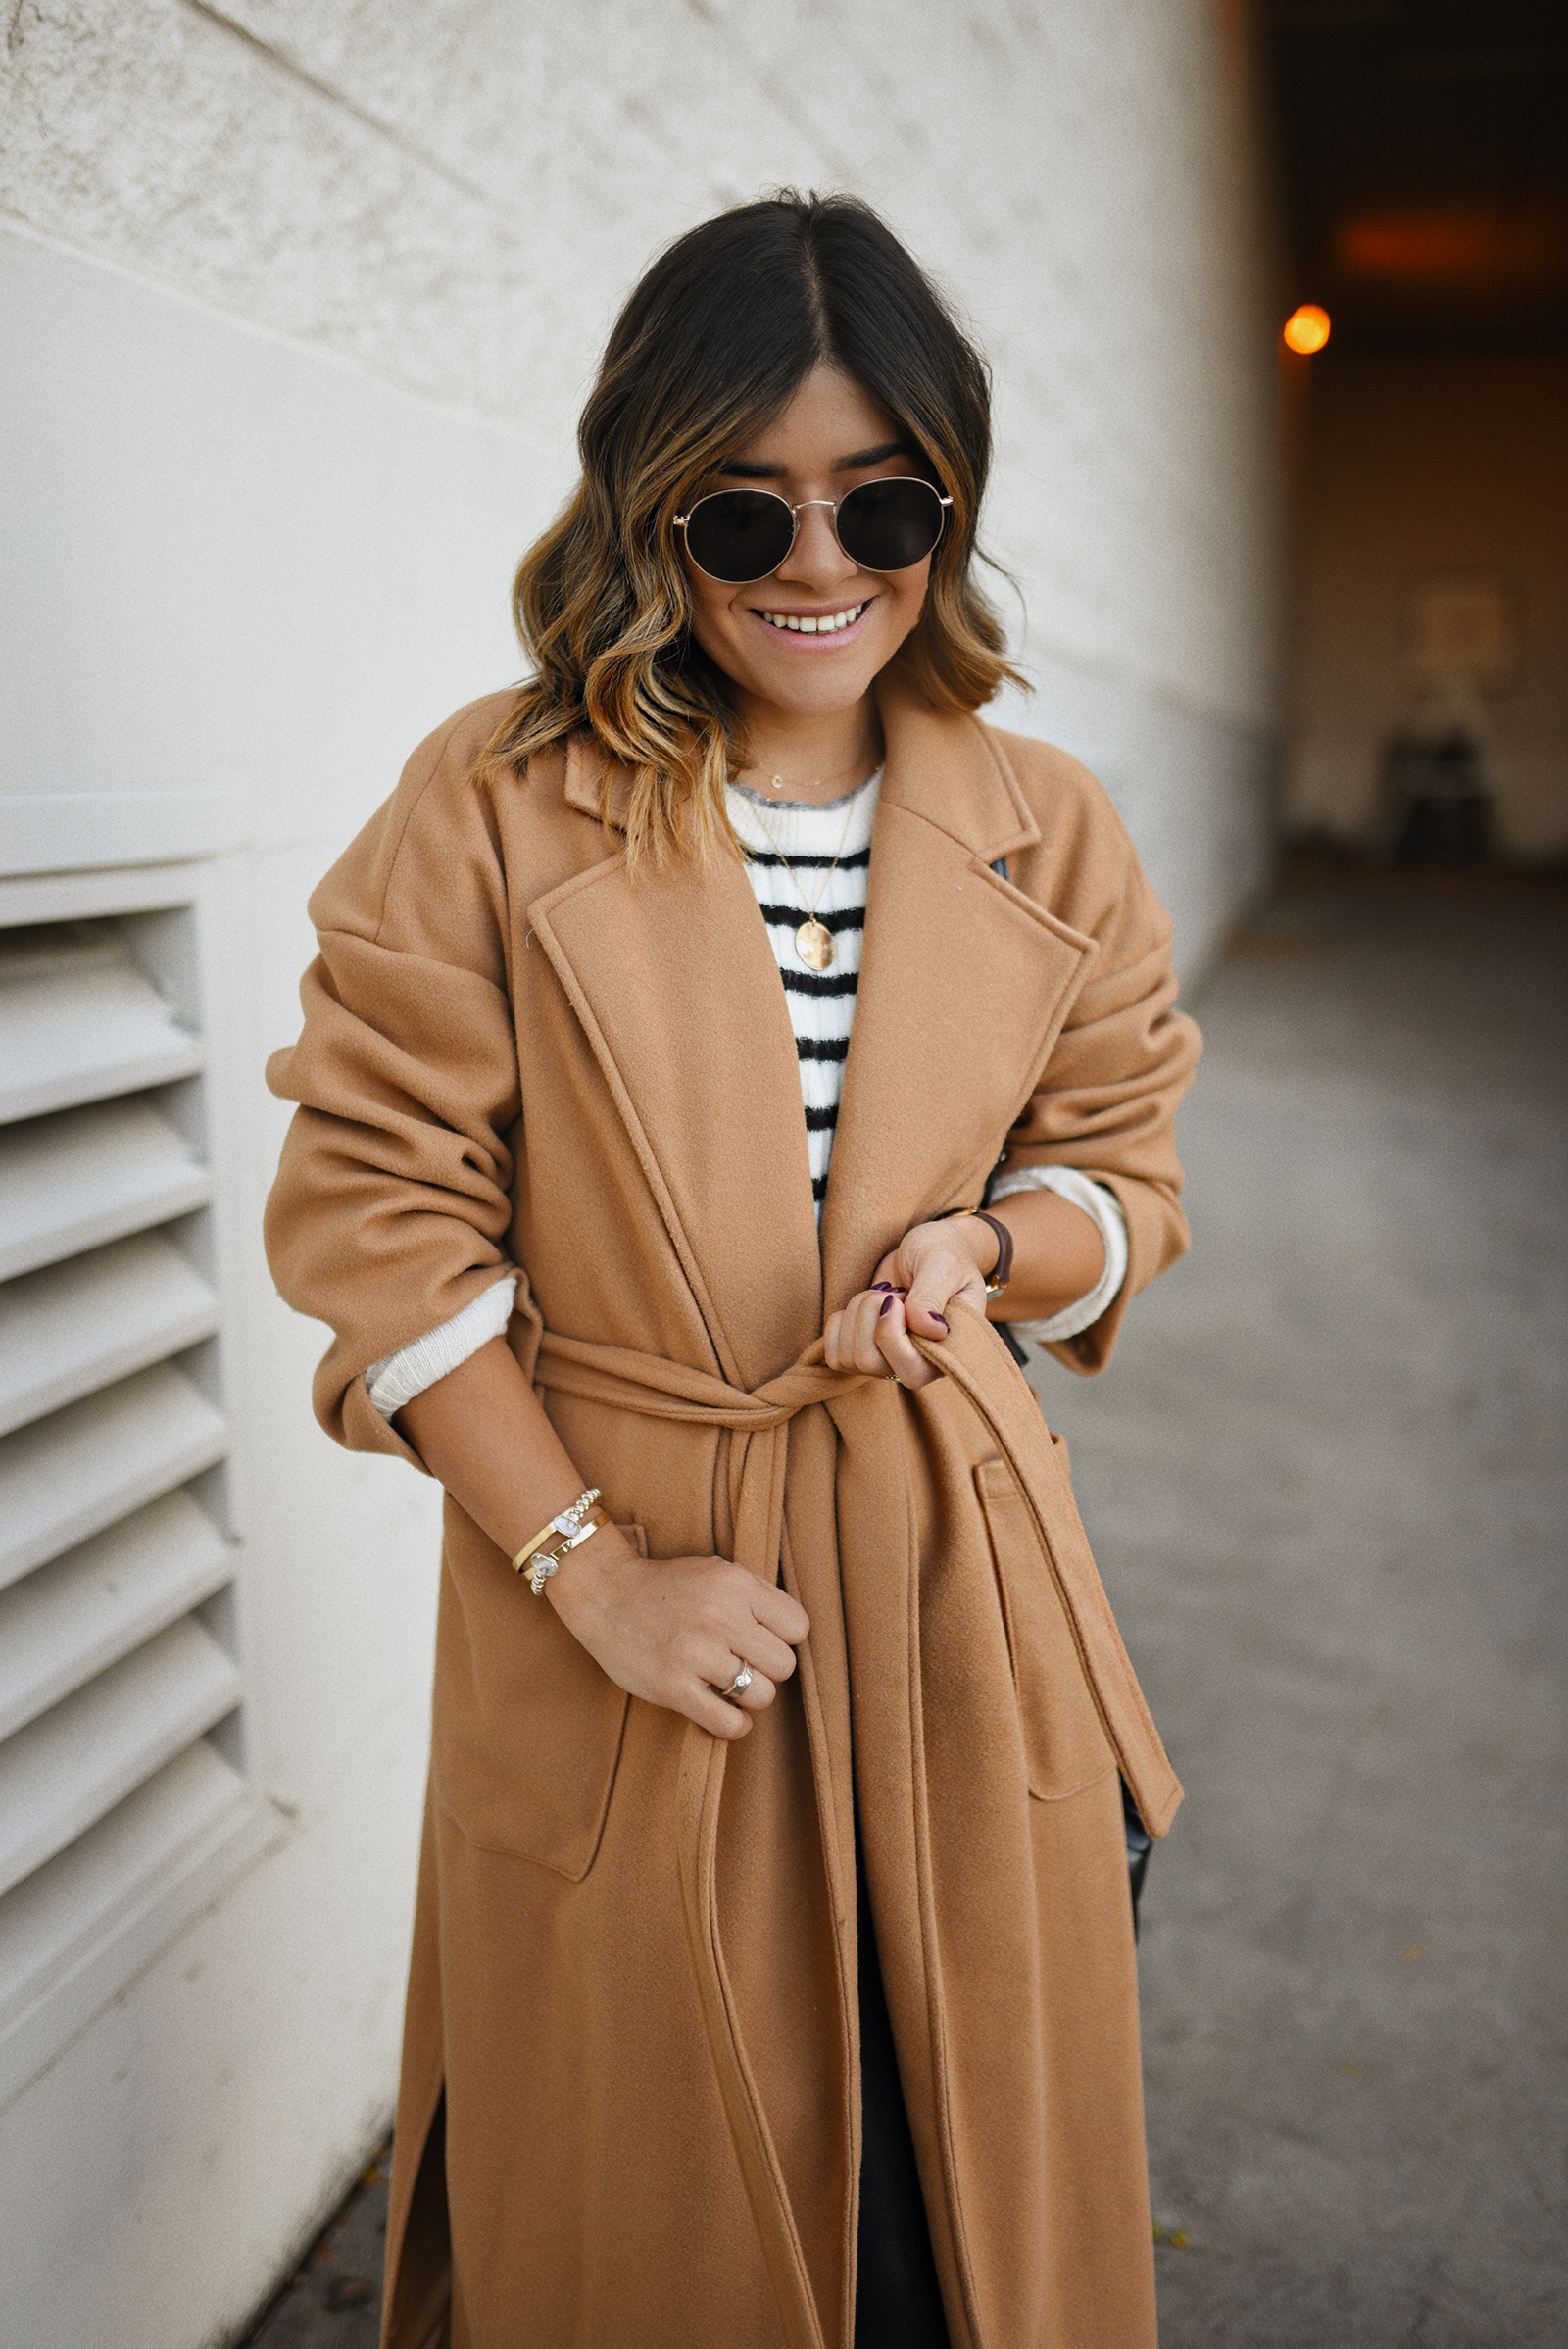 Carolina Hellal of Chic Talk wearing a Shein camel coat, H&M nautical sweater, Spanx faux leather leggings and Vince Camuto black chunky boots.